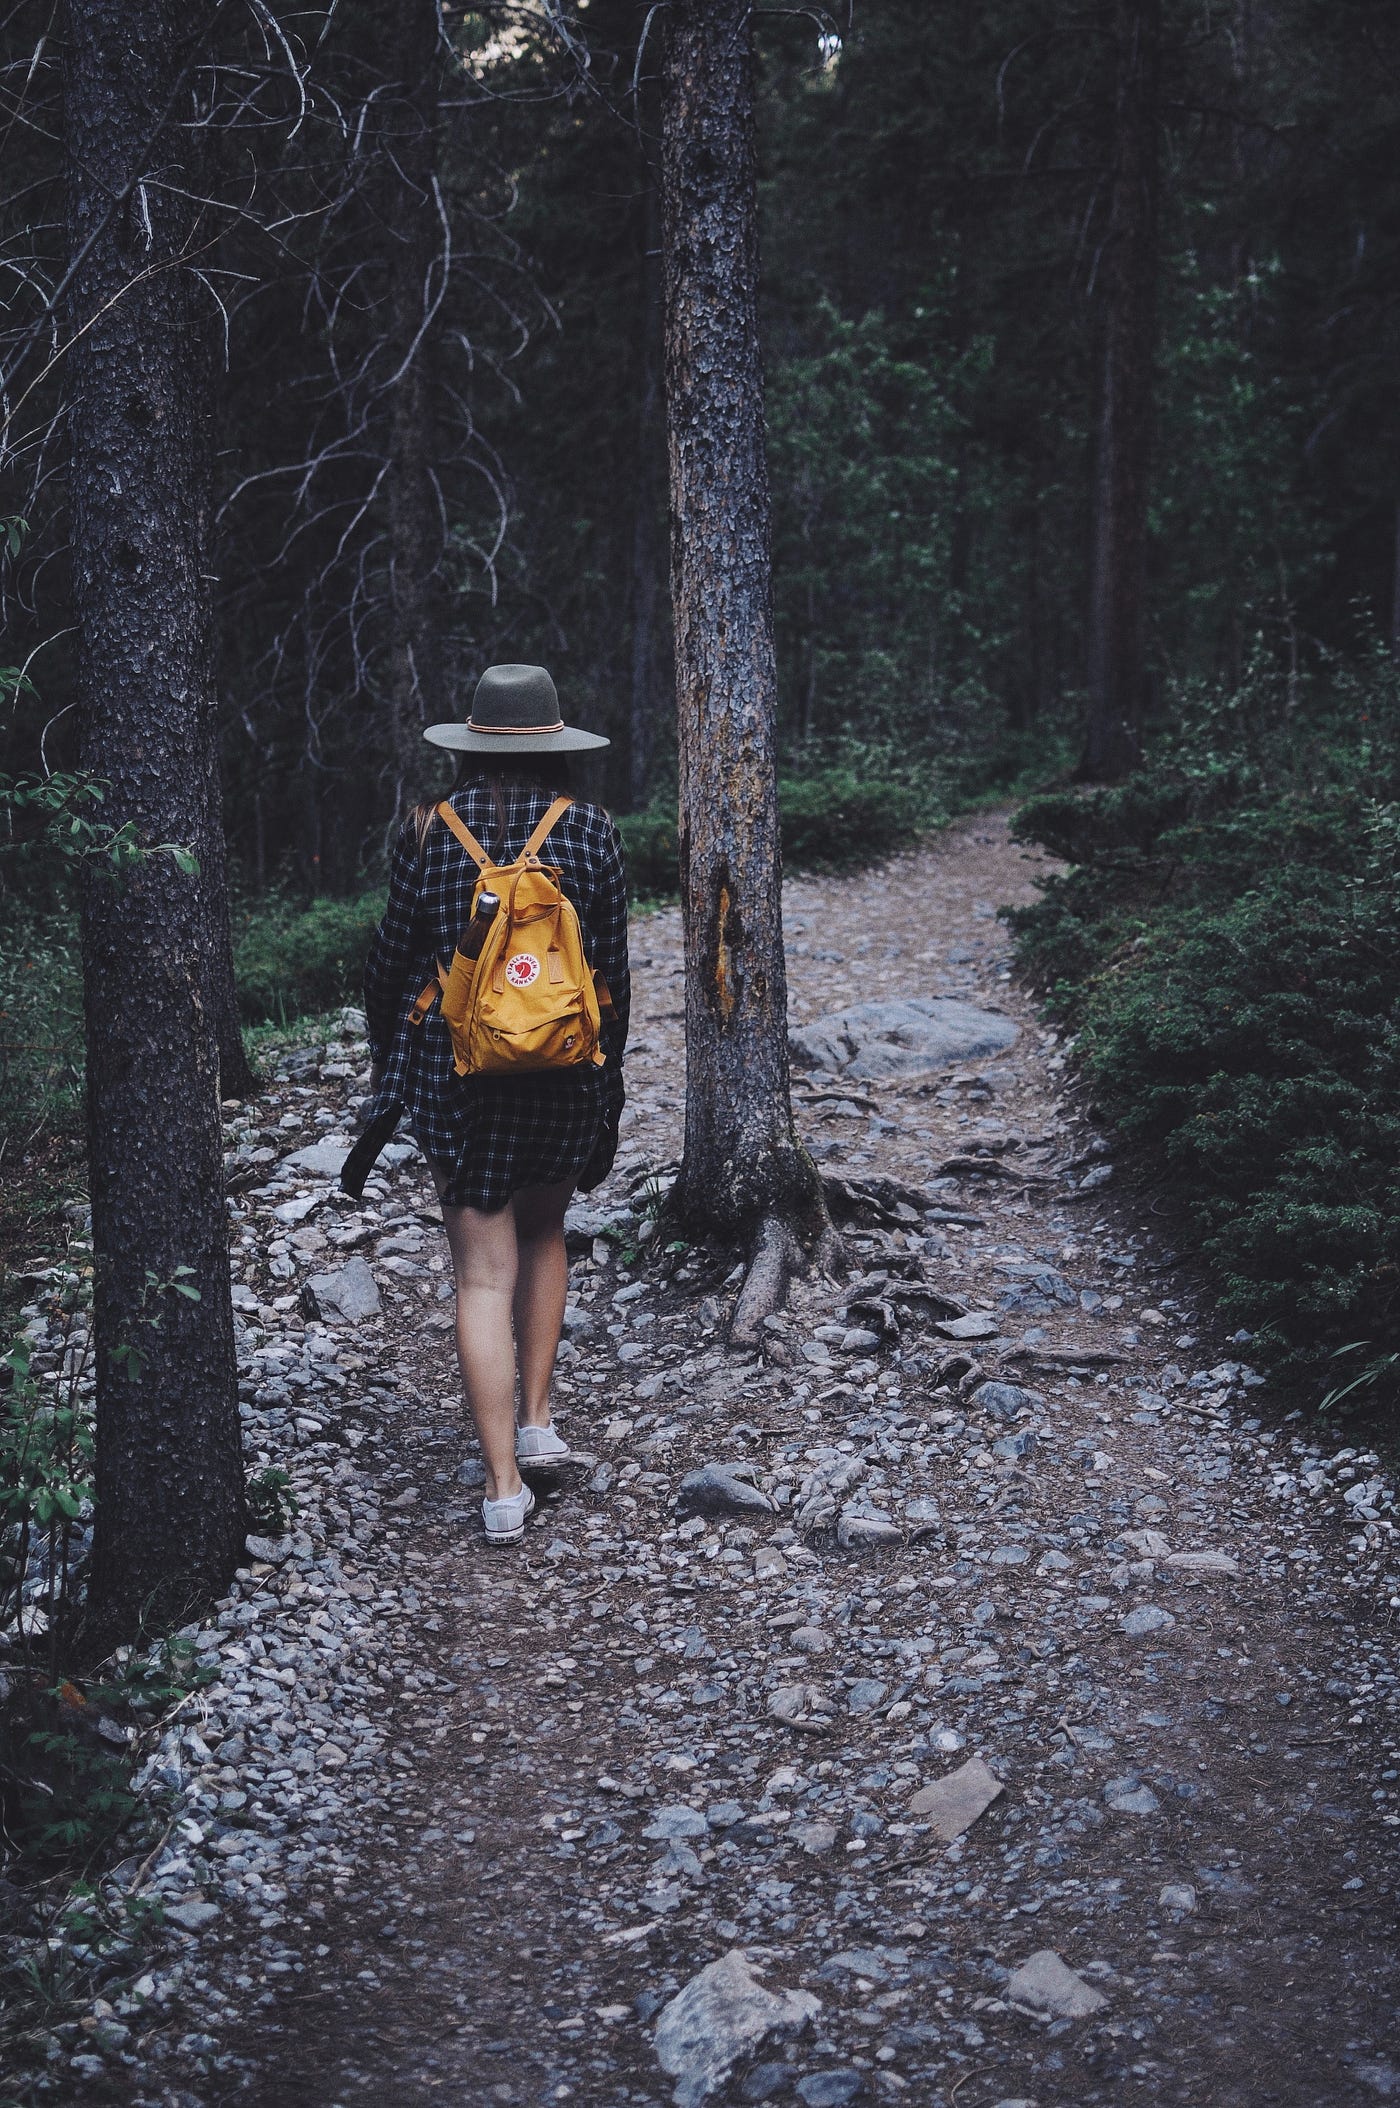 How To Find the Perfect Hiking Trail | by Monica Juno | Medium